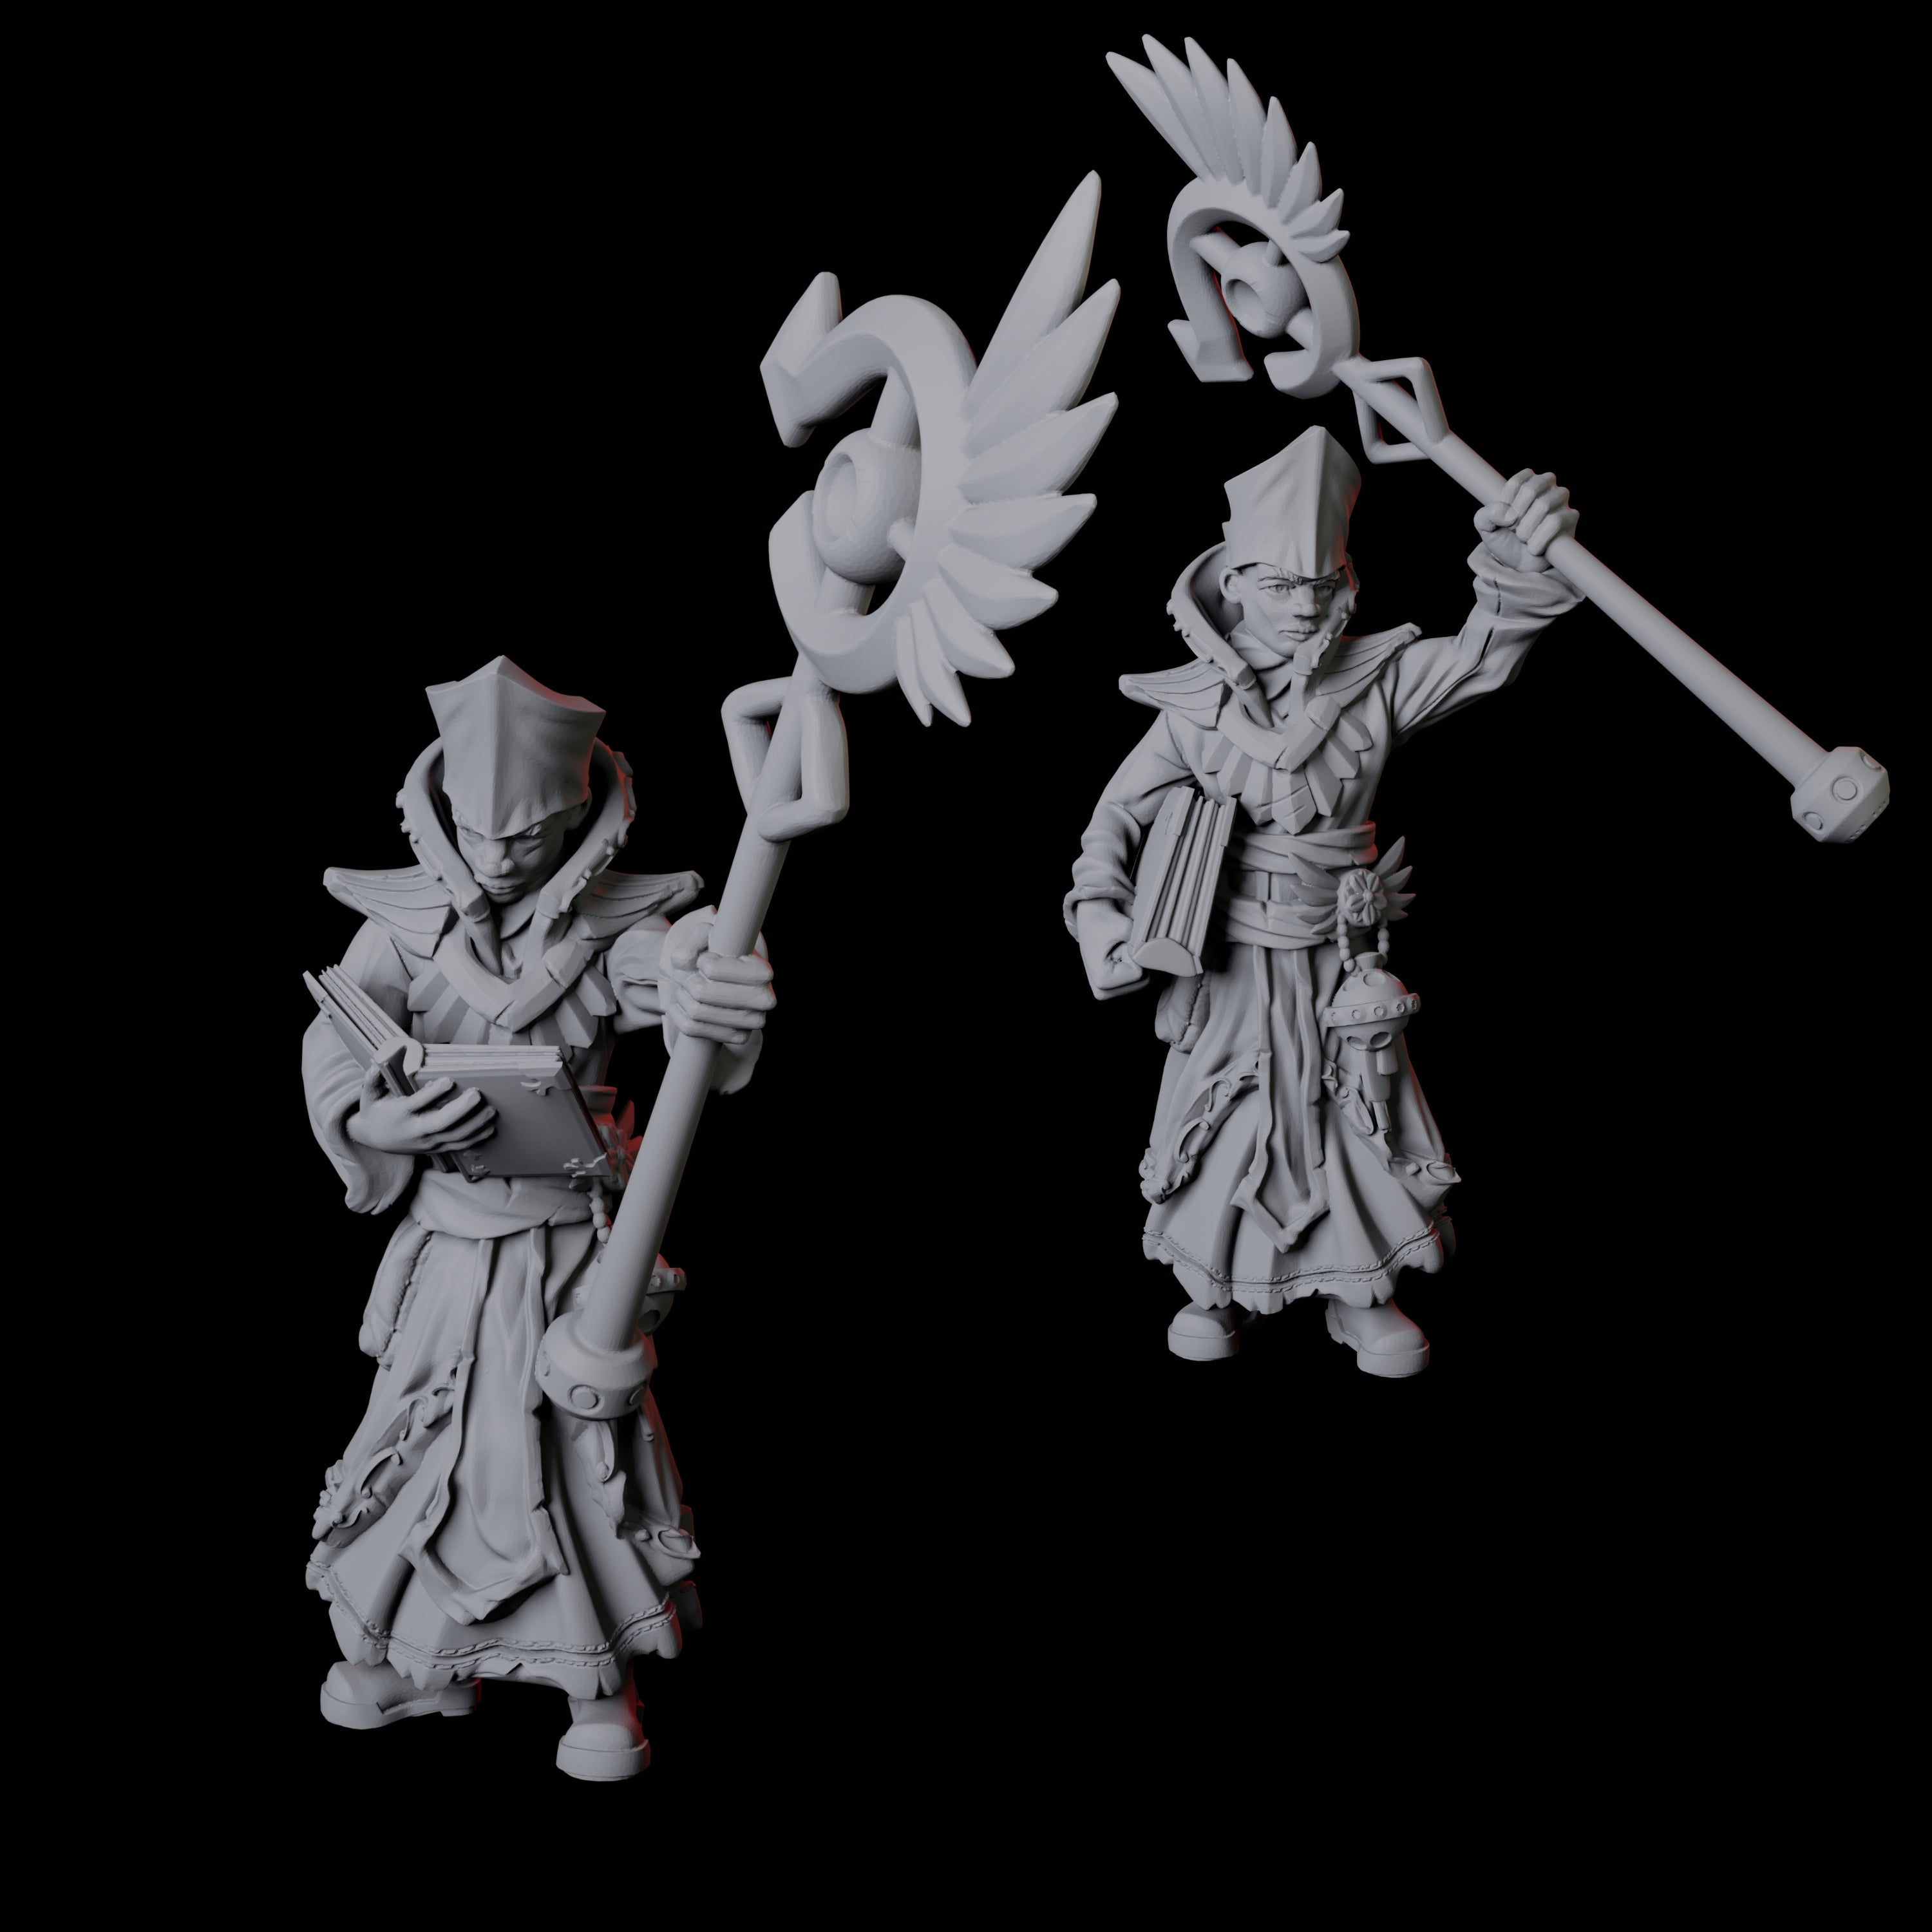 Pair of Noble Priests Miniature for Dungeons and Dragons, Pathfinder or other TTRPGs